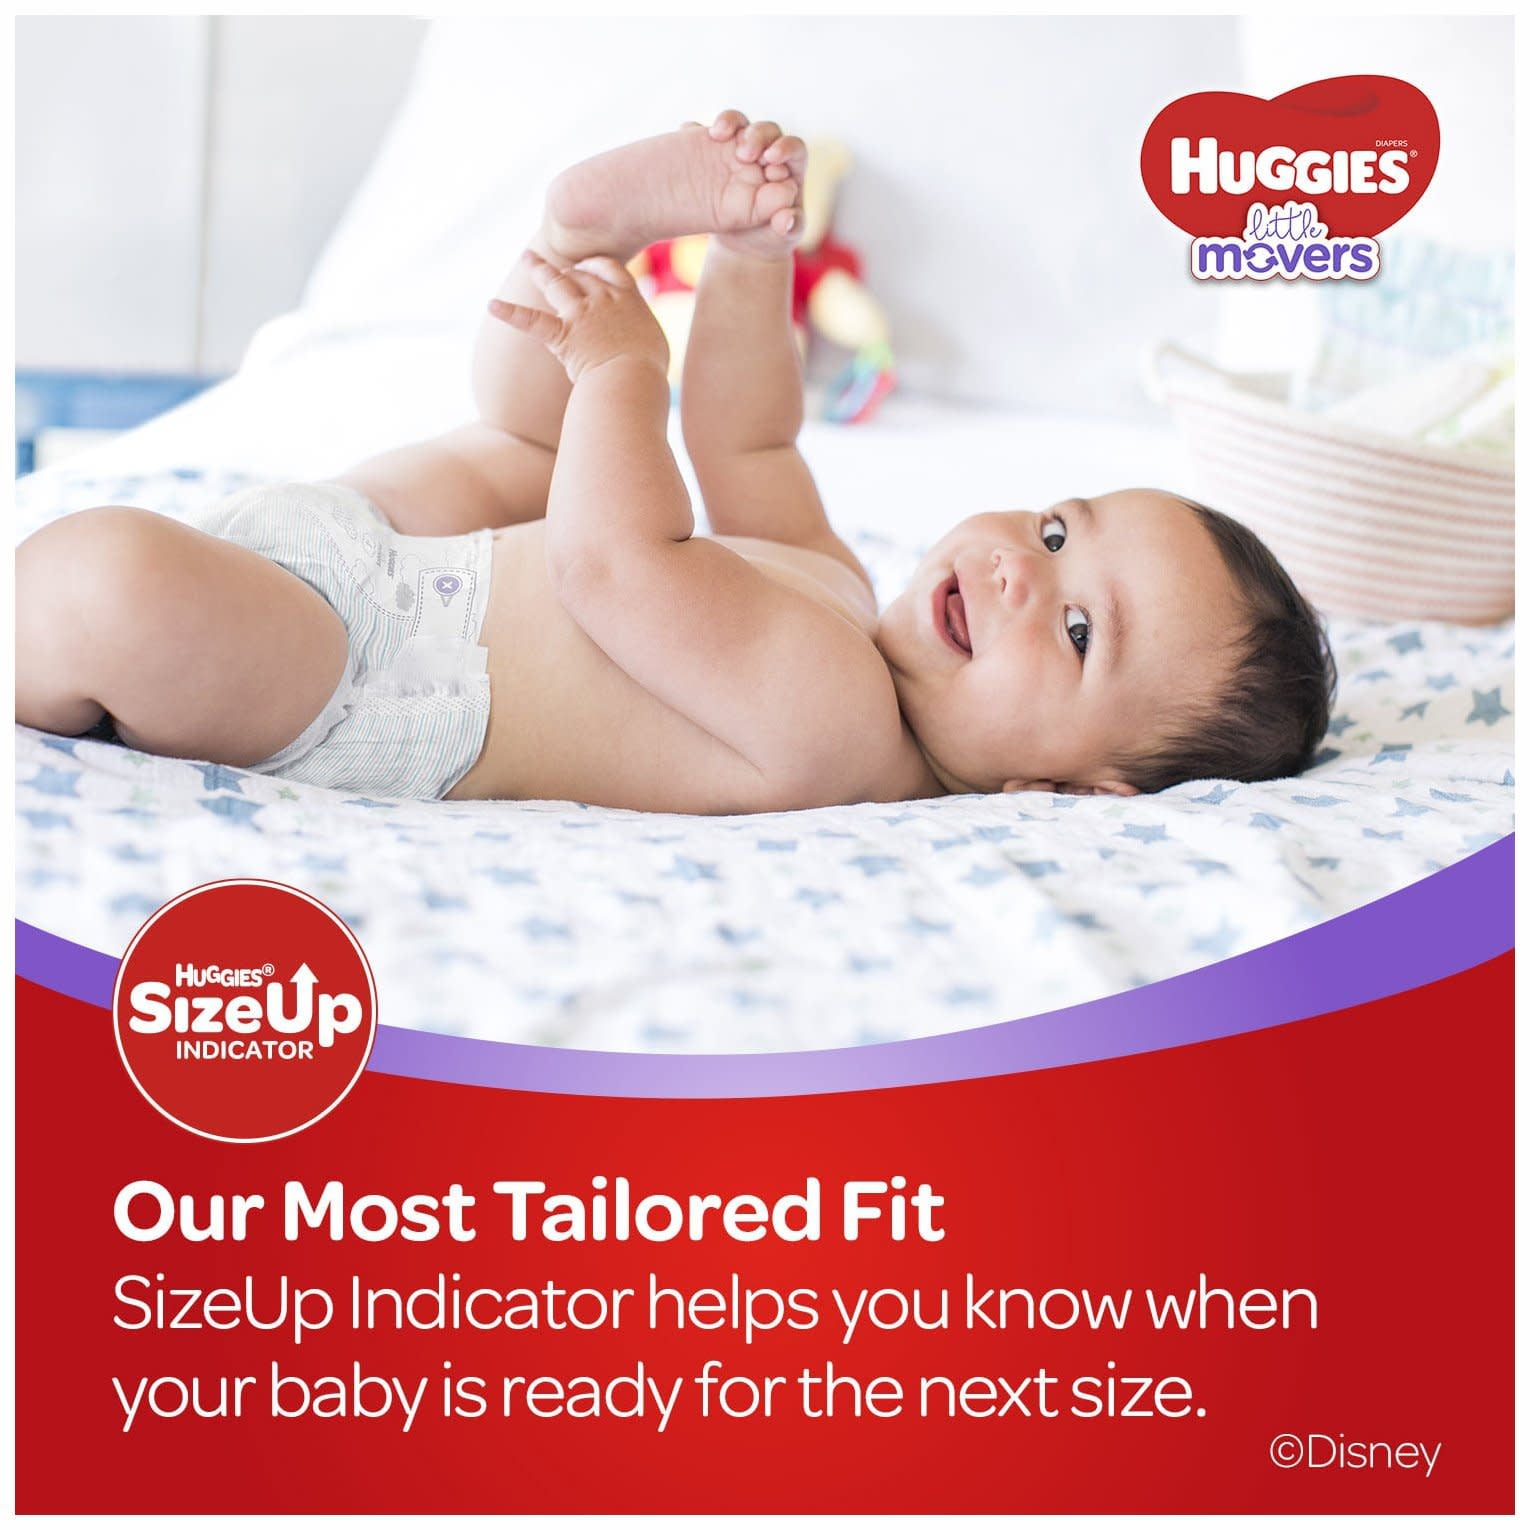 Huggies Diapers: The Perfect Gift for #MovingMoments (and a free